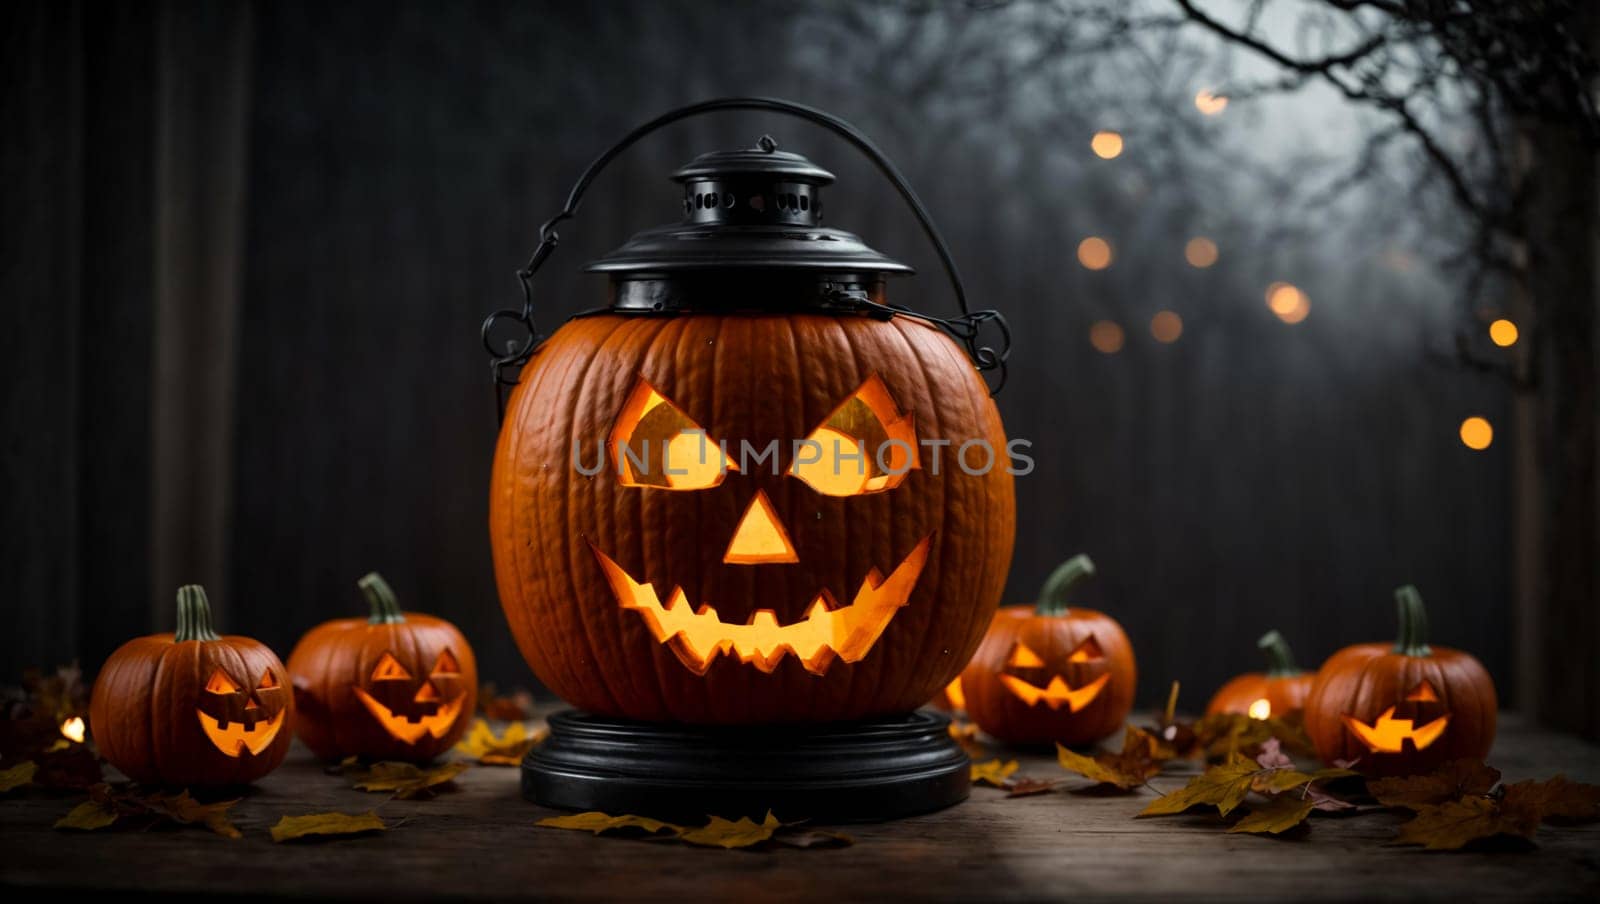 pumpkin in the form of a Halloween lantern with a creepy smiling face on a dark background